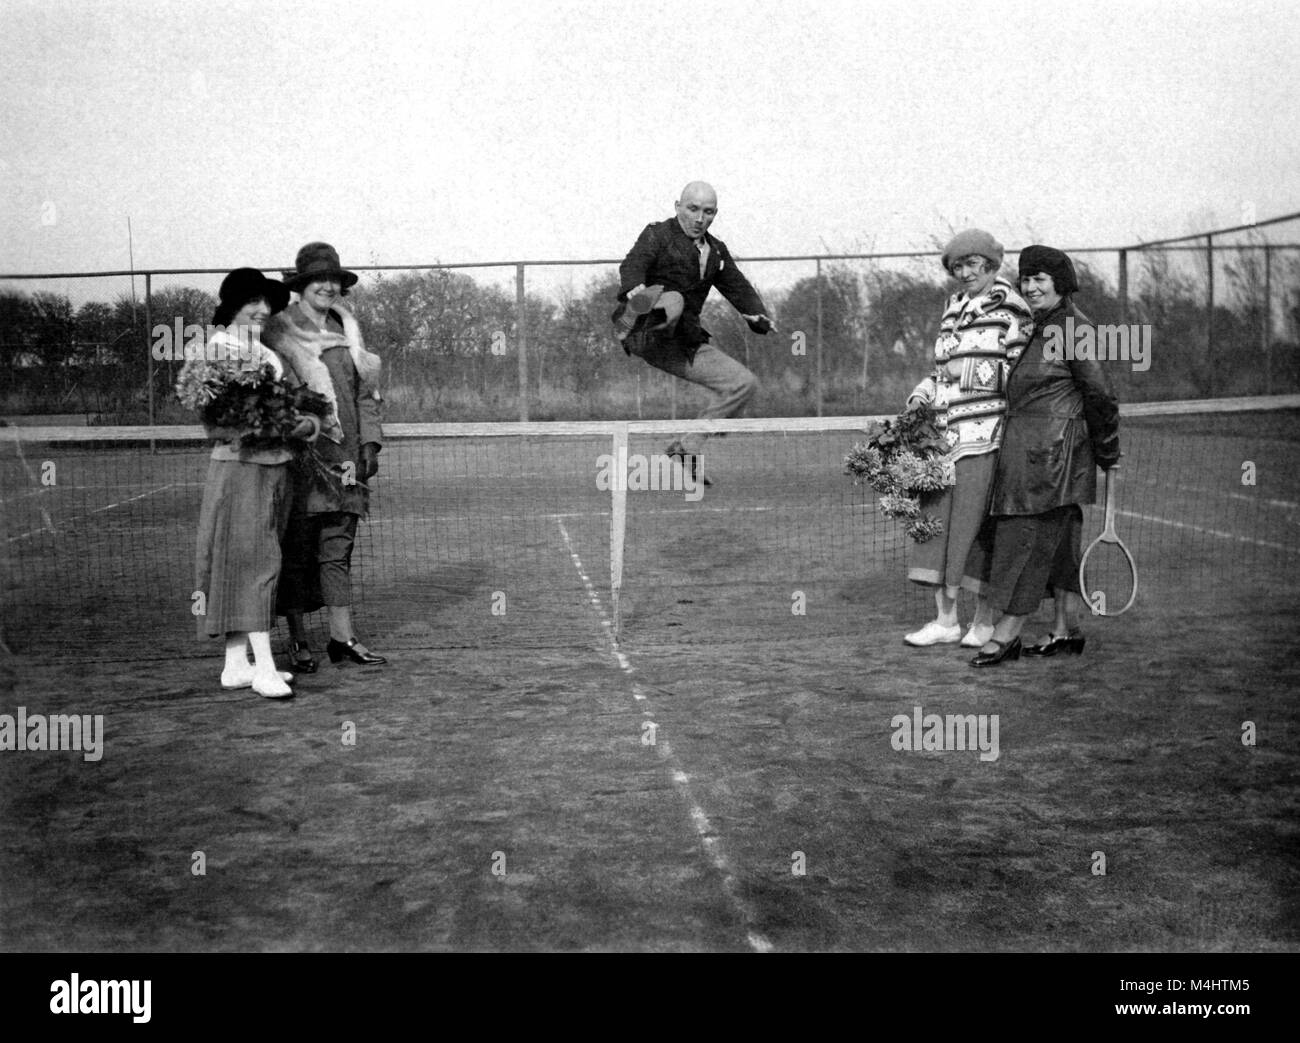 Bragger on the tennis court, man jumps over the tennis net to impress four women, ca. 1928, 1920s, exact place unknown, Germany Stock Photo